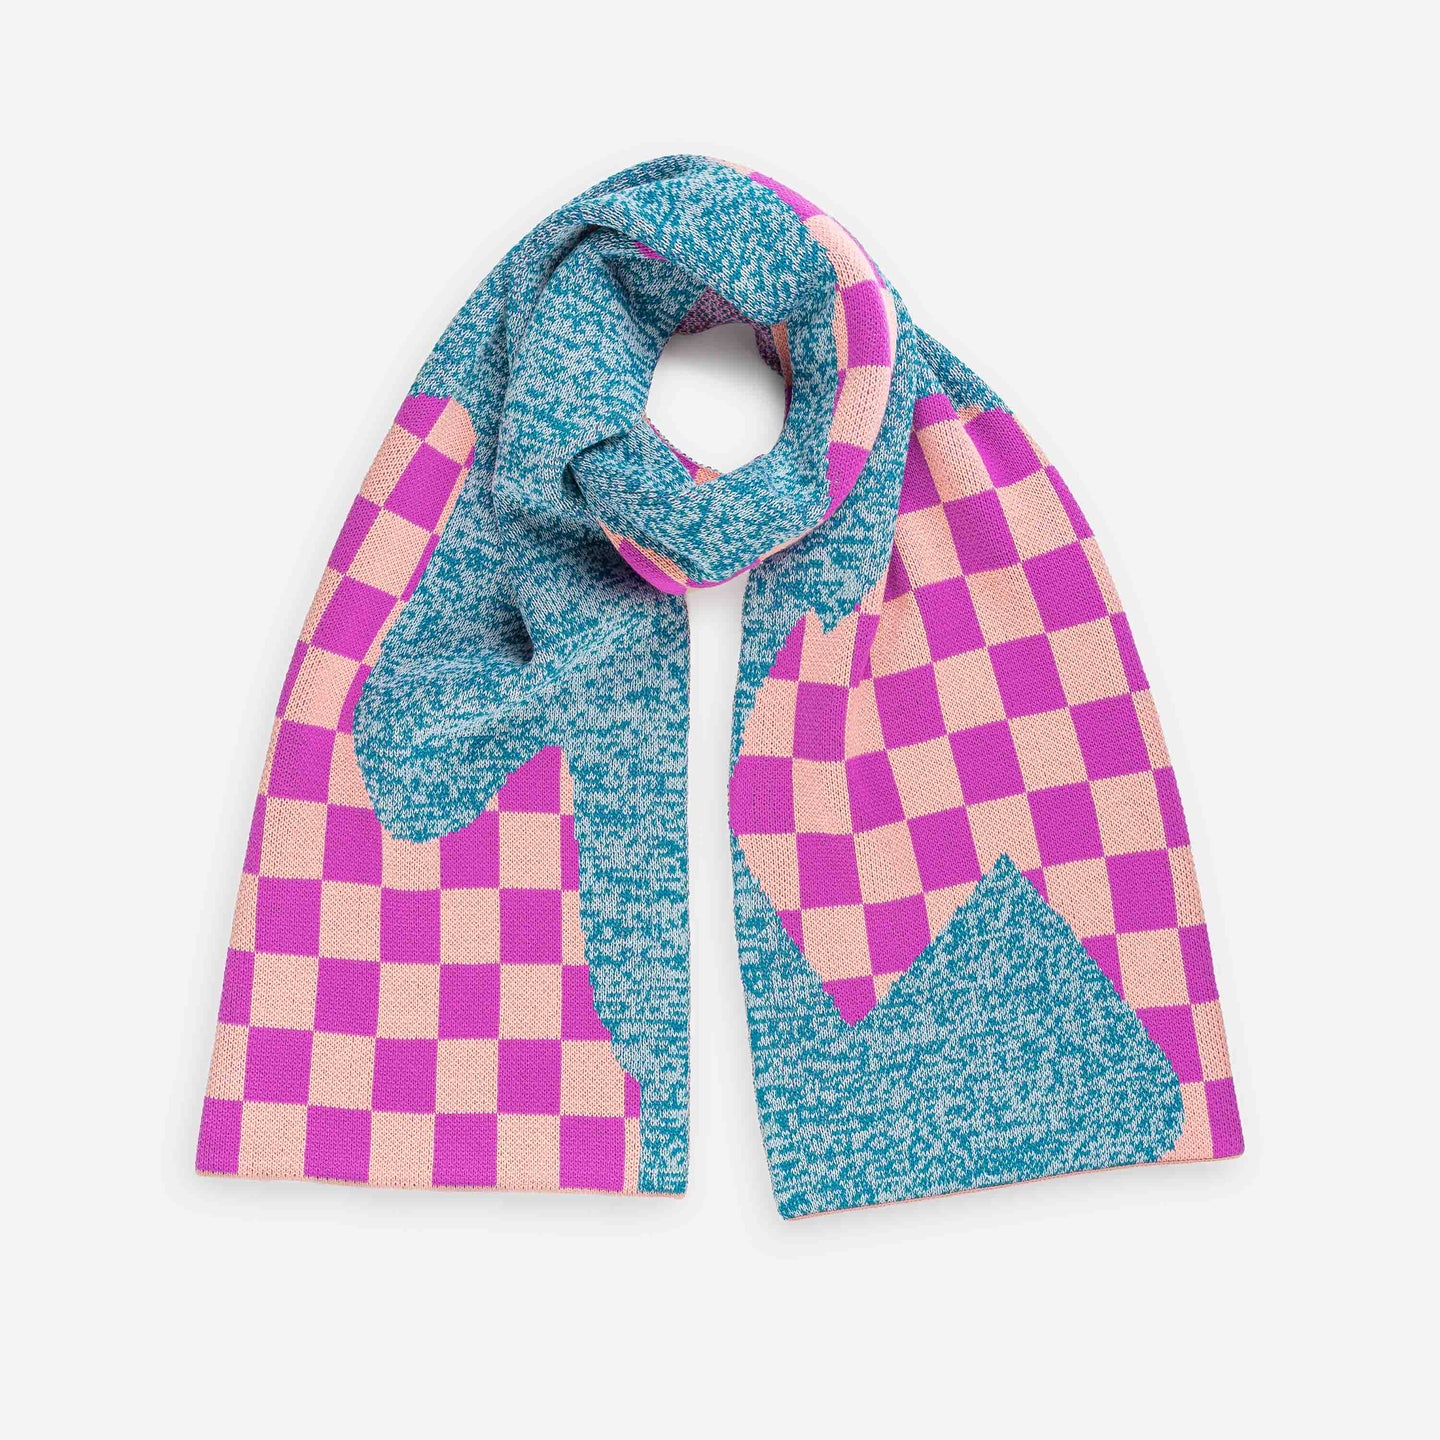 Checkerboard Spill Big Knit Scarf Racing Checkerboard Marl Graphic